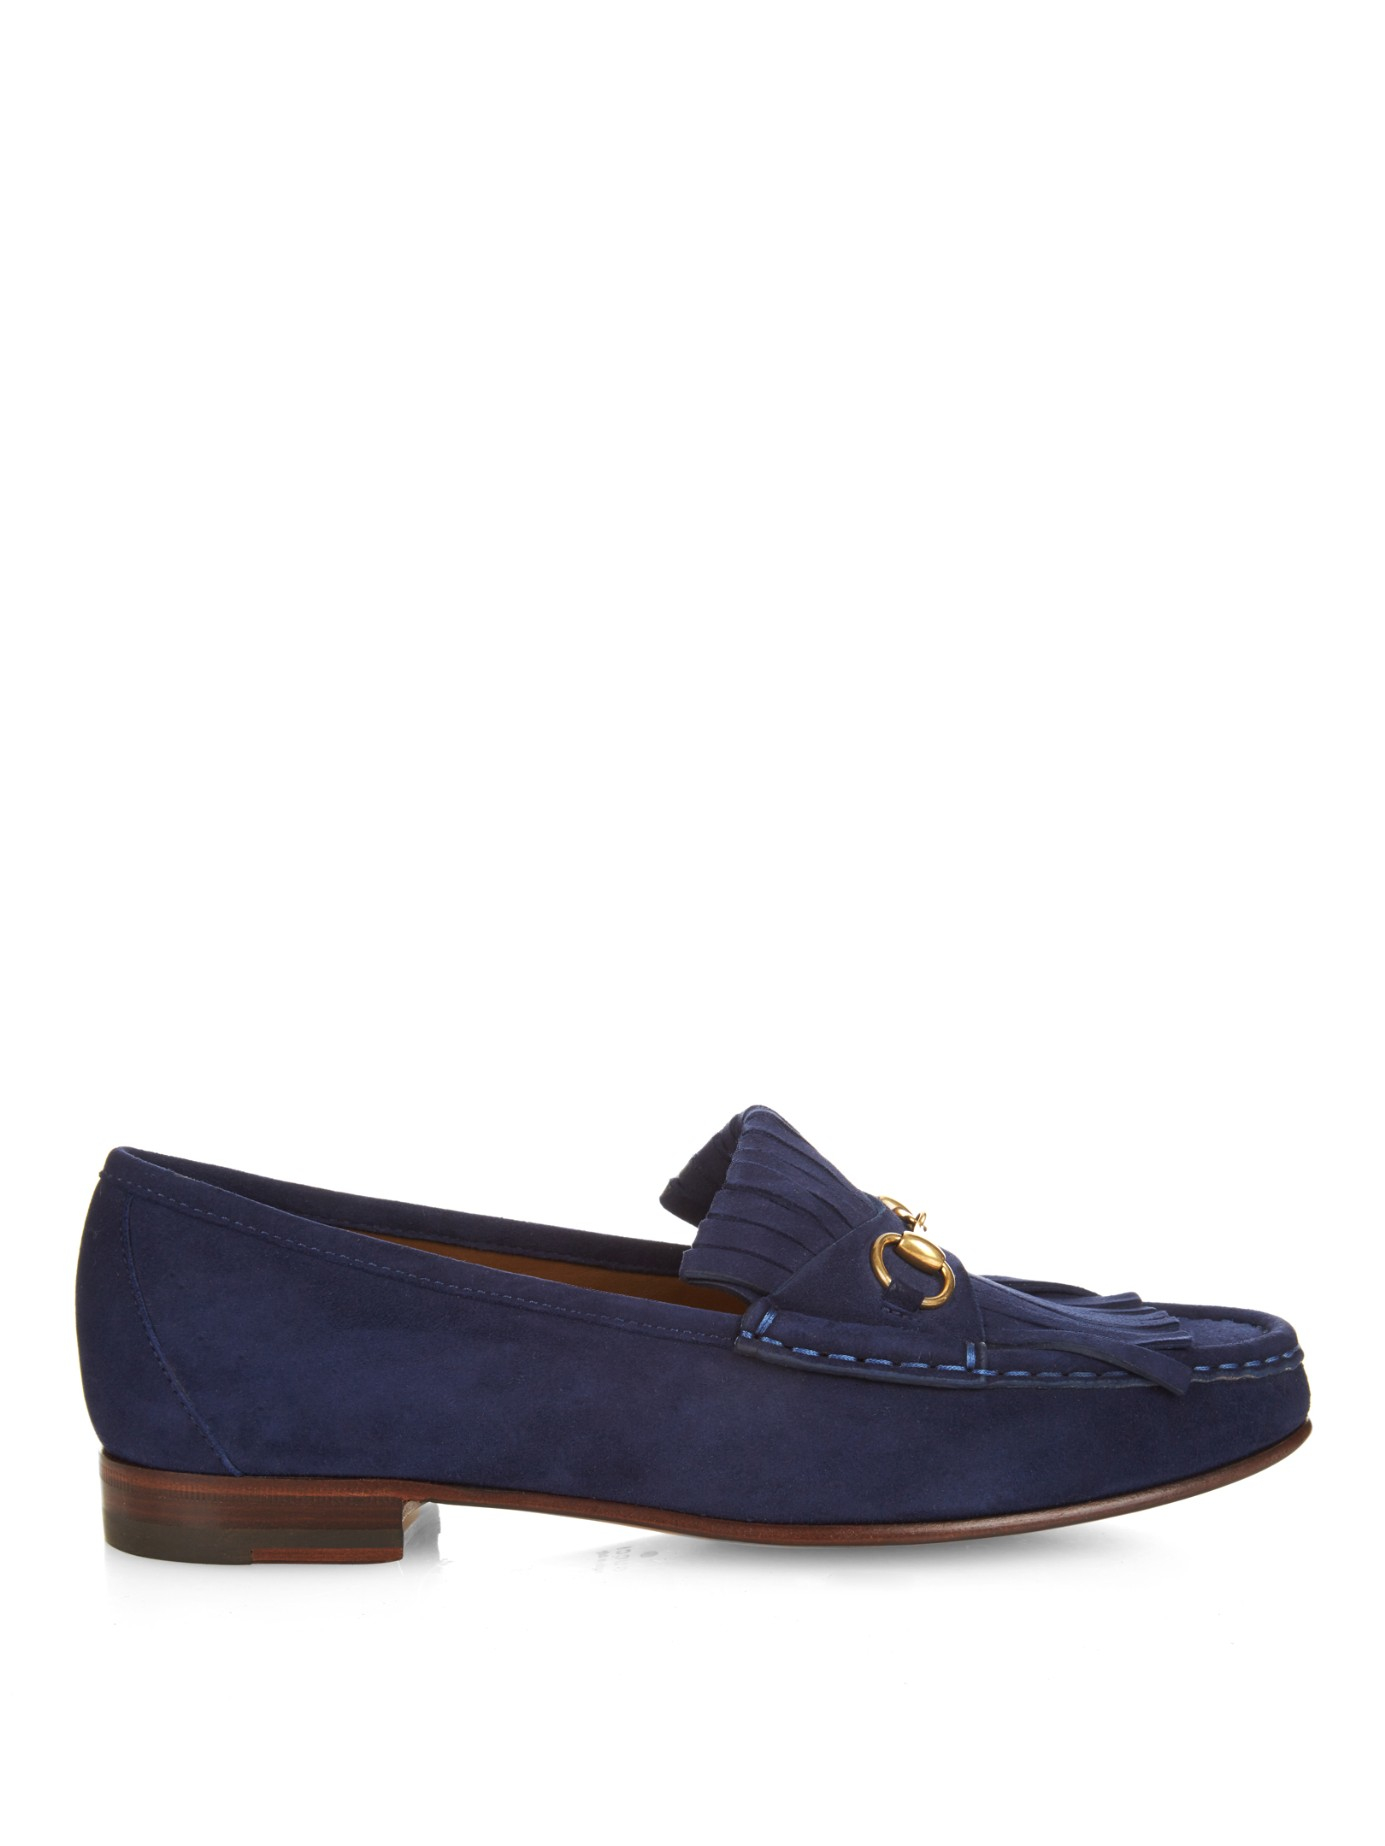 Lyst - Gucci Horsebit Suede Loafers in Blue